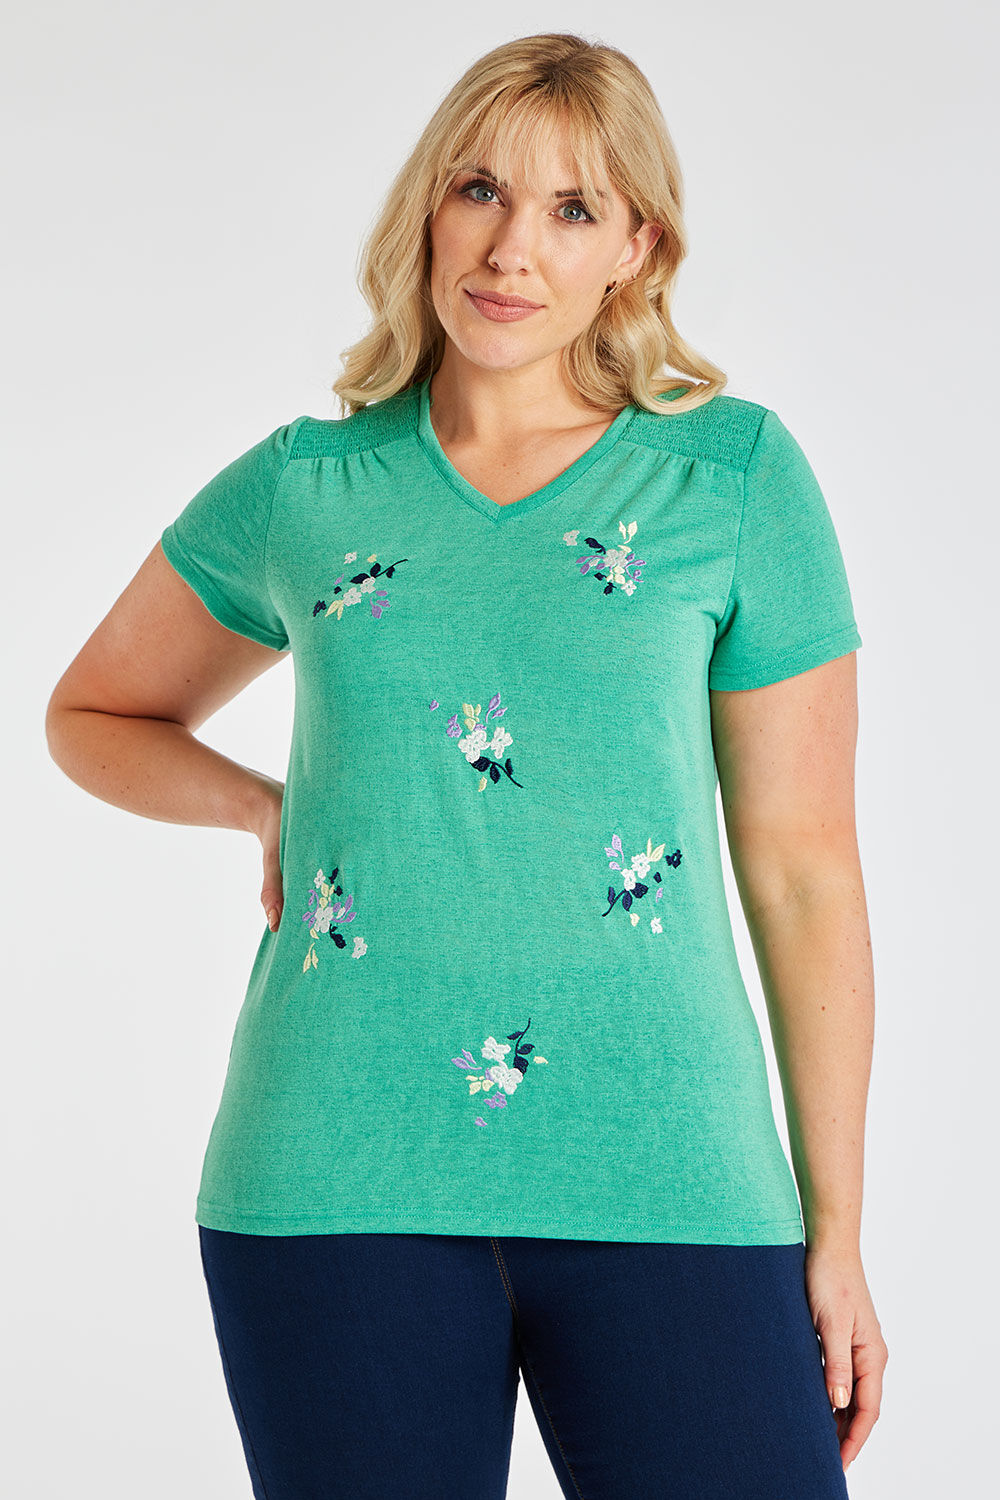 Bonmarche Green Short Sleeves Embroidered Flower T-Shirt, Size: 10